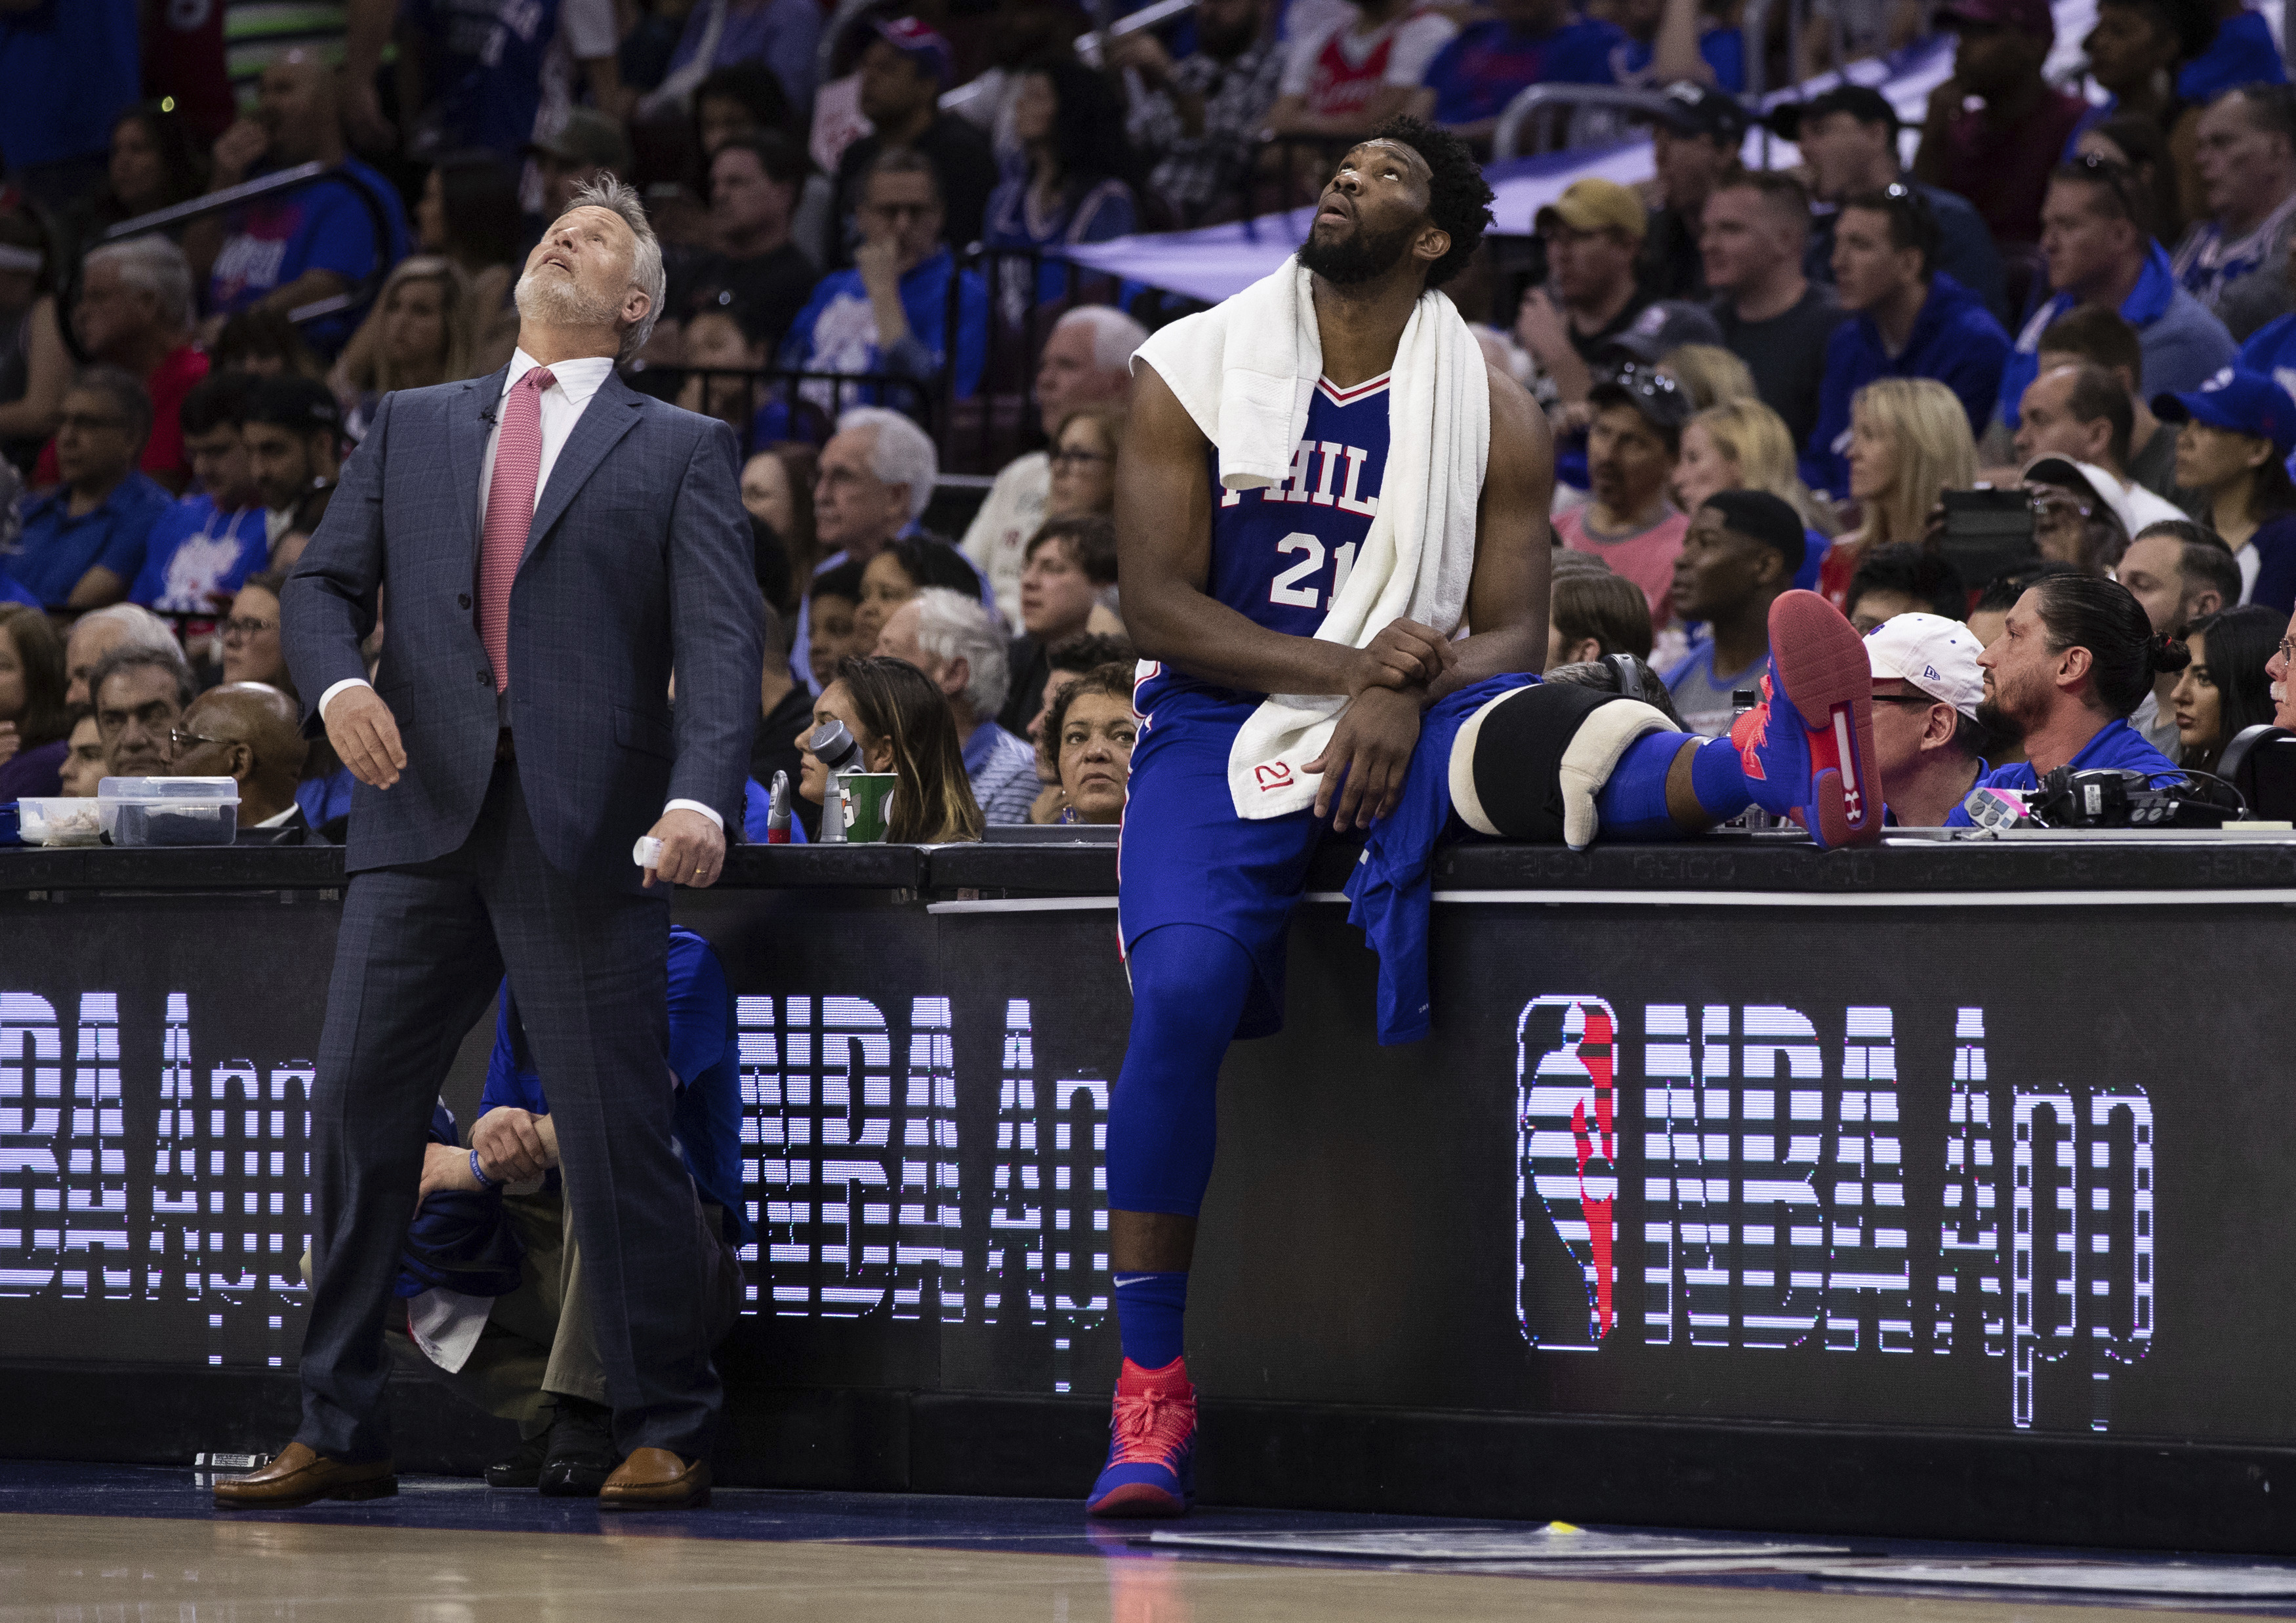 Game of Phones: 76ers get blown call on bench in blowout